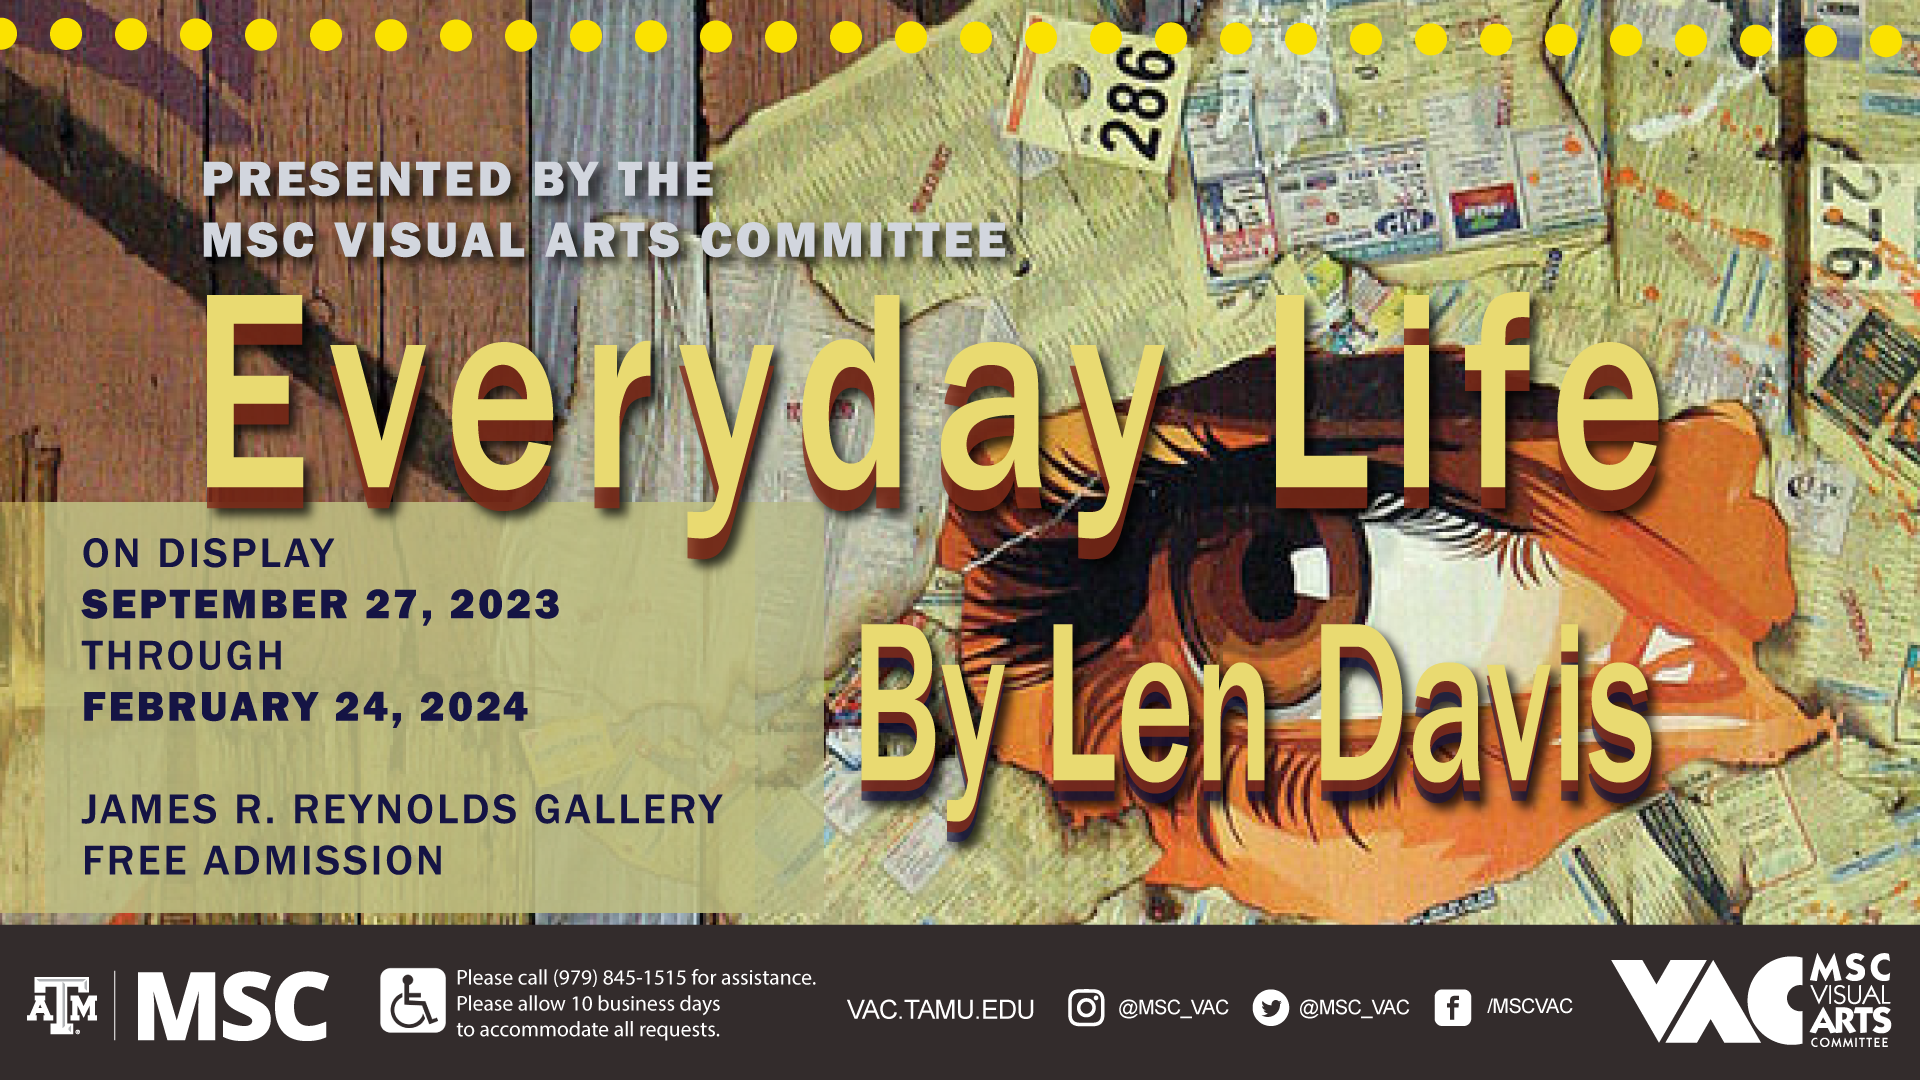 Presented by the MSC Visual Arts Committee: Everyday Life by Len Davis. On Display September 27, 2023 through February 24, 2024 at James R. Reynolds Gallery. Free Admission. Please call (979)845-1515 for assistance. Please allow 10 business days to accommodate all requests. Website: vac.tamu.edu Instagram: @MSC_VAC Twitter (X): @MSC_VAC Facebook: /MSCVAC